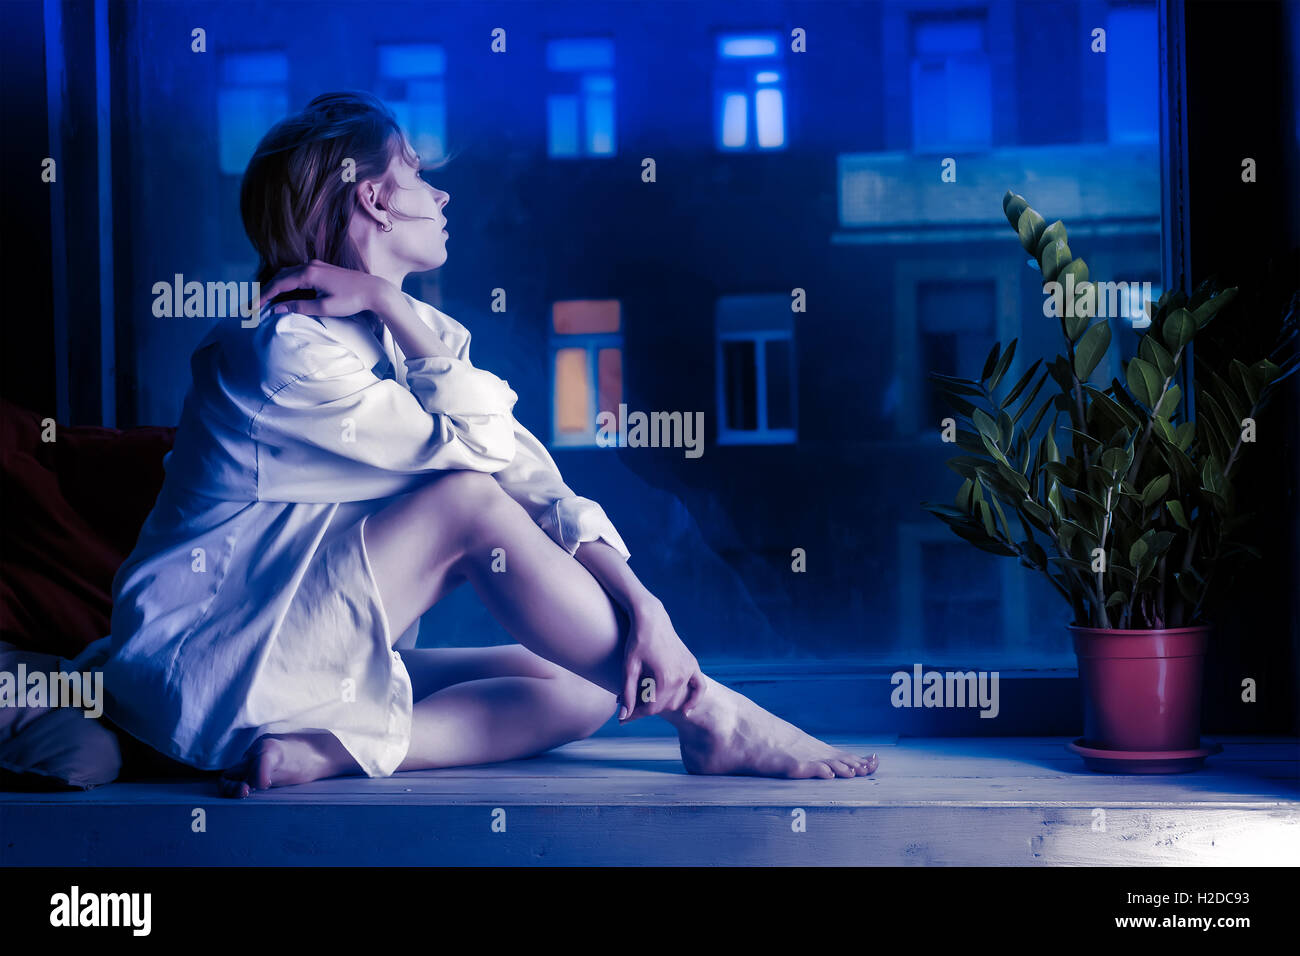 Half-dressed meditative girl in white shirt sits on window sill. Evening urban scene outside the window. Toned in blue colors Stock Photo